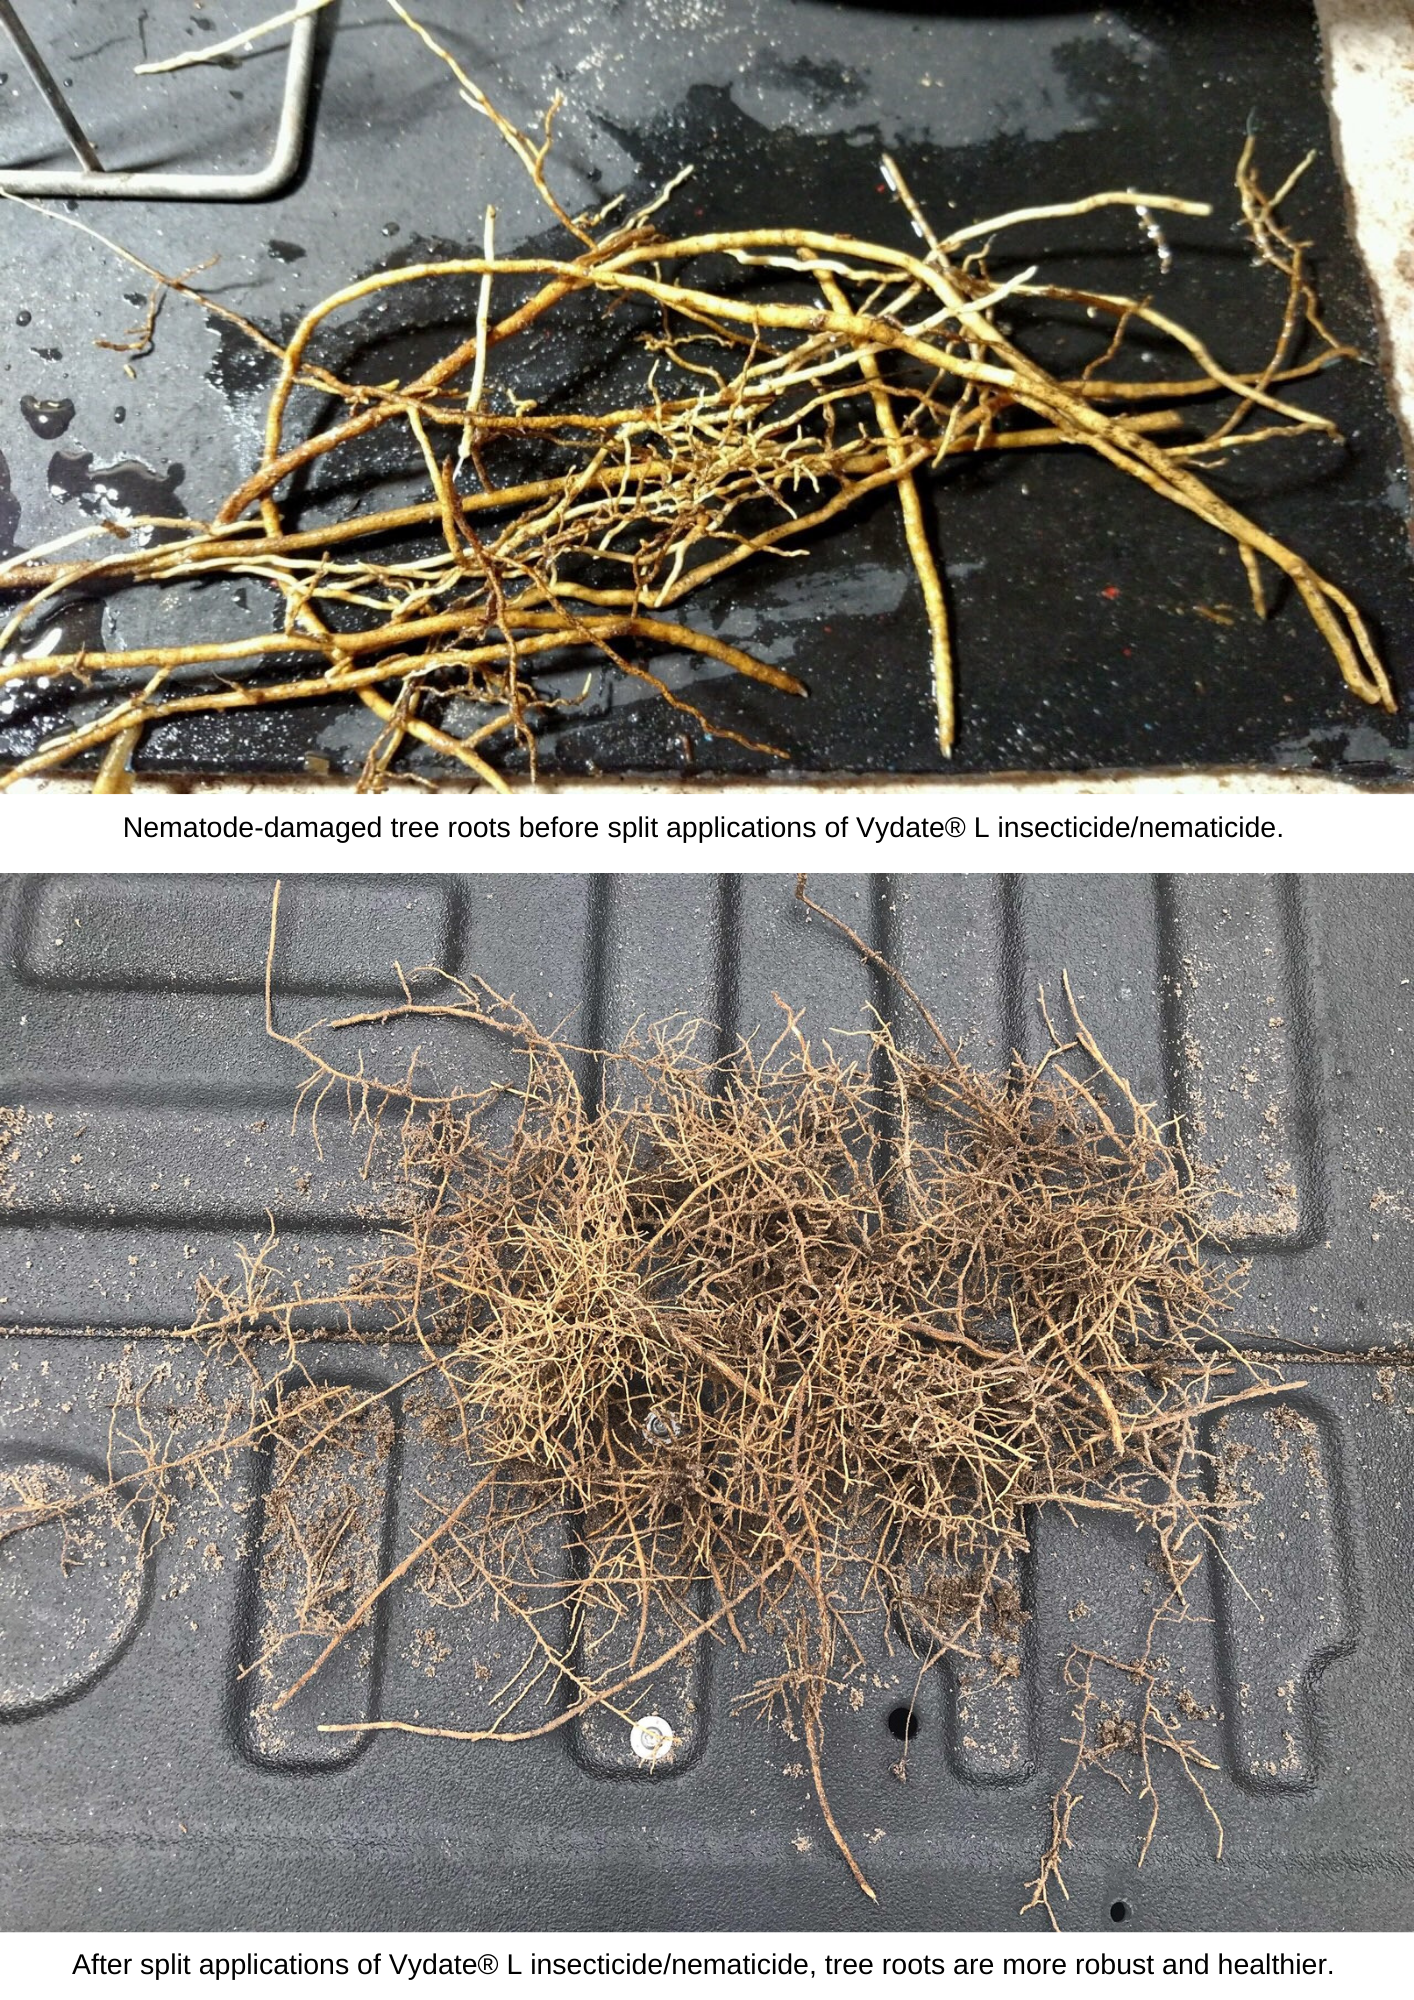 Nematode-damaged tree roots before split applications of Vydate® L insecticide_nematicide.